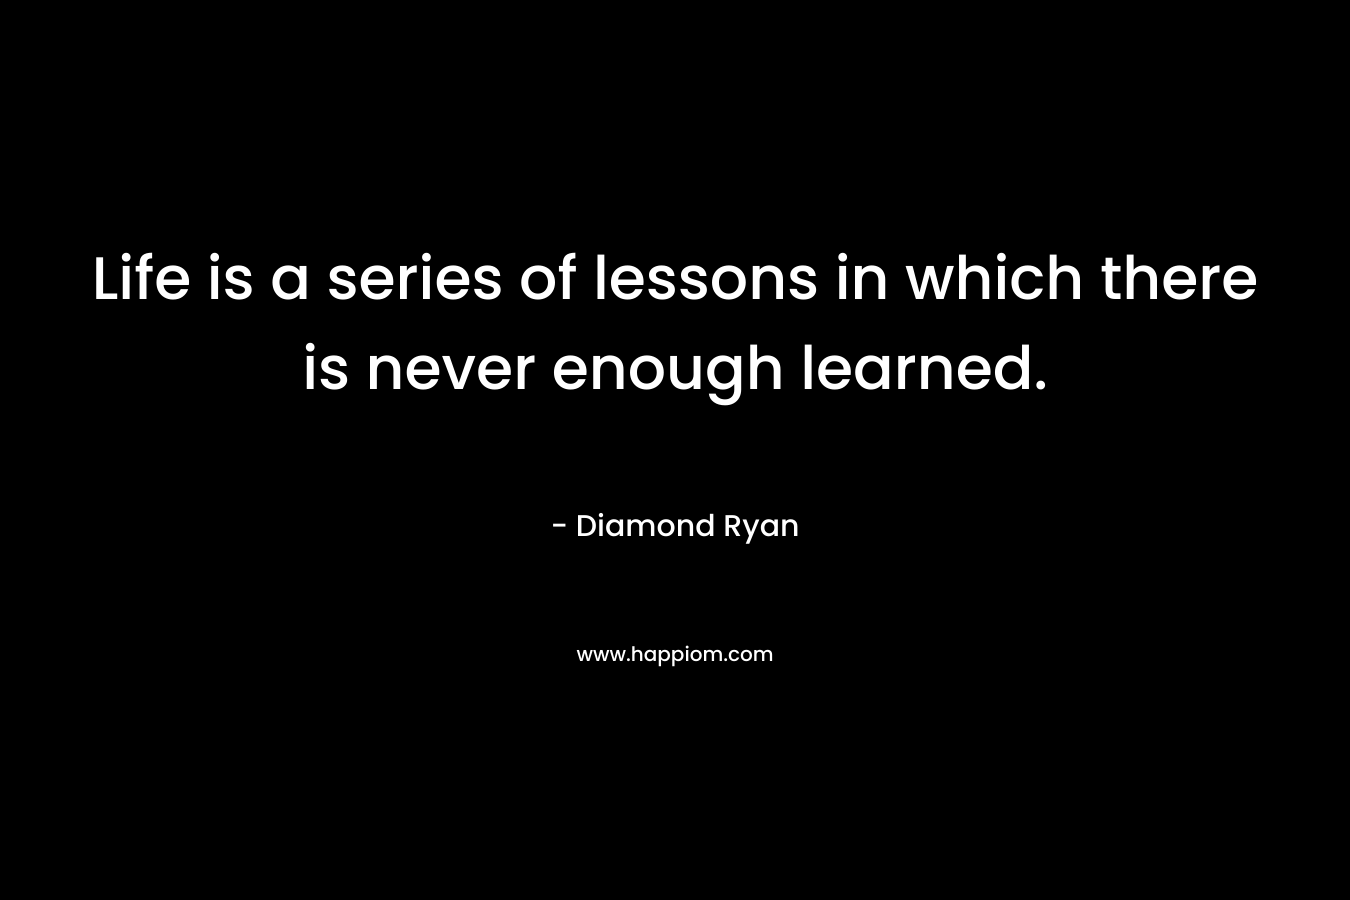 Life is a series of lessons in which there is never enough learned.